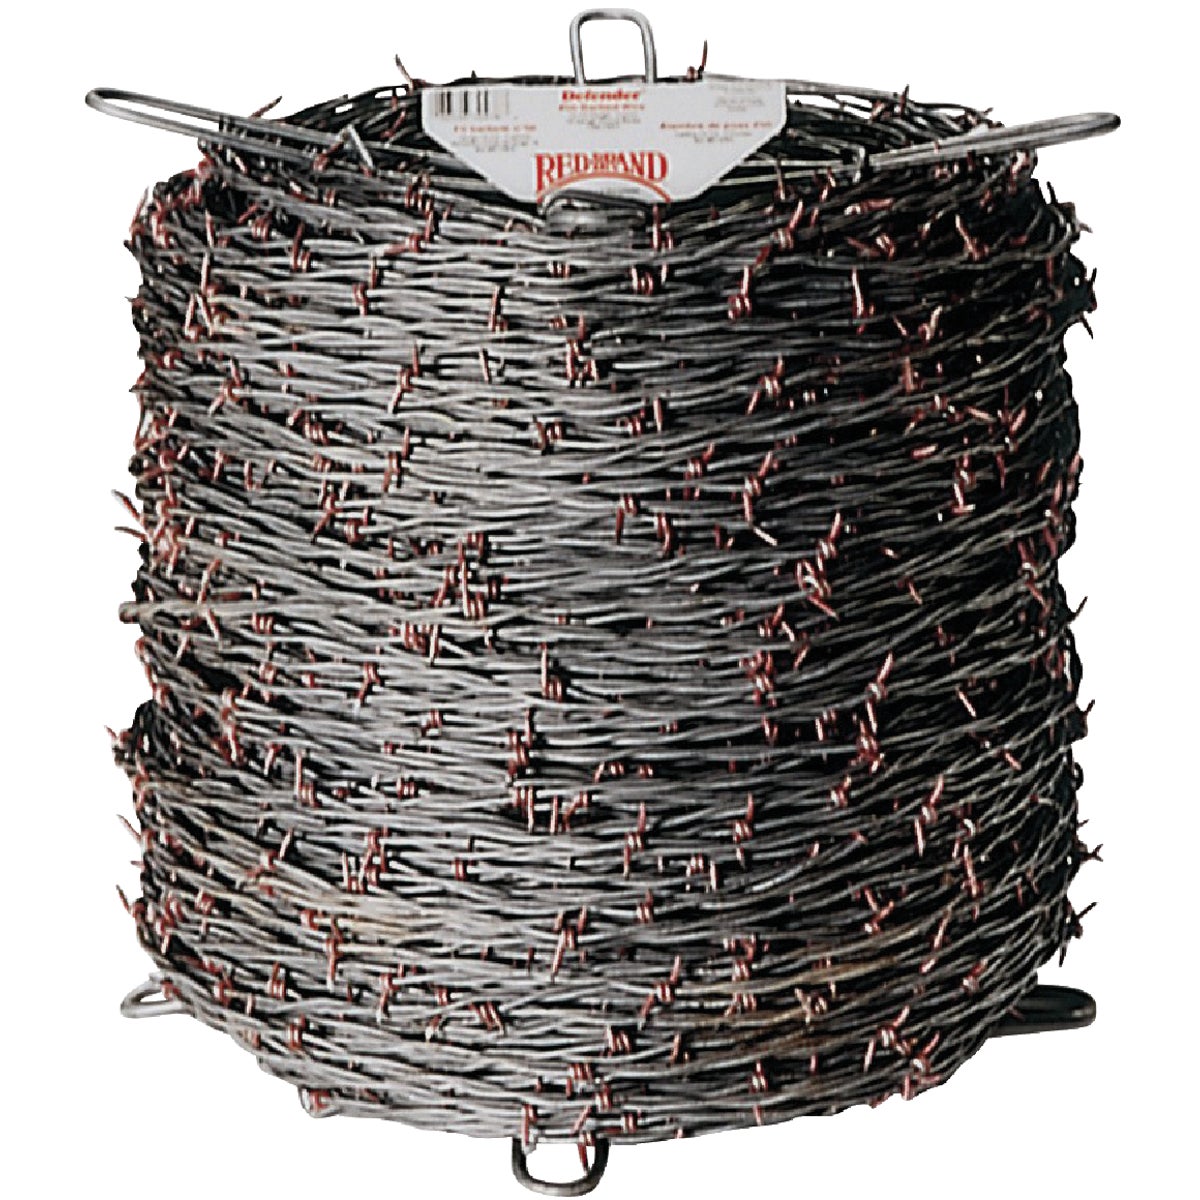 Item 720928, Galvanized double wire with barbs designed for security and containment.